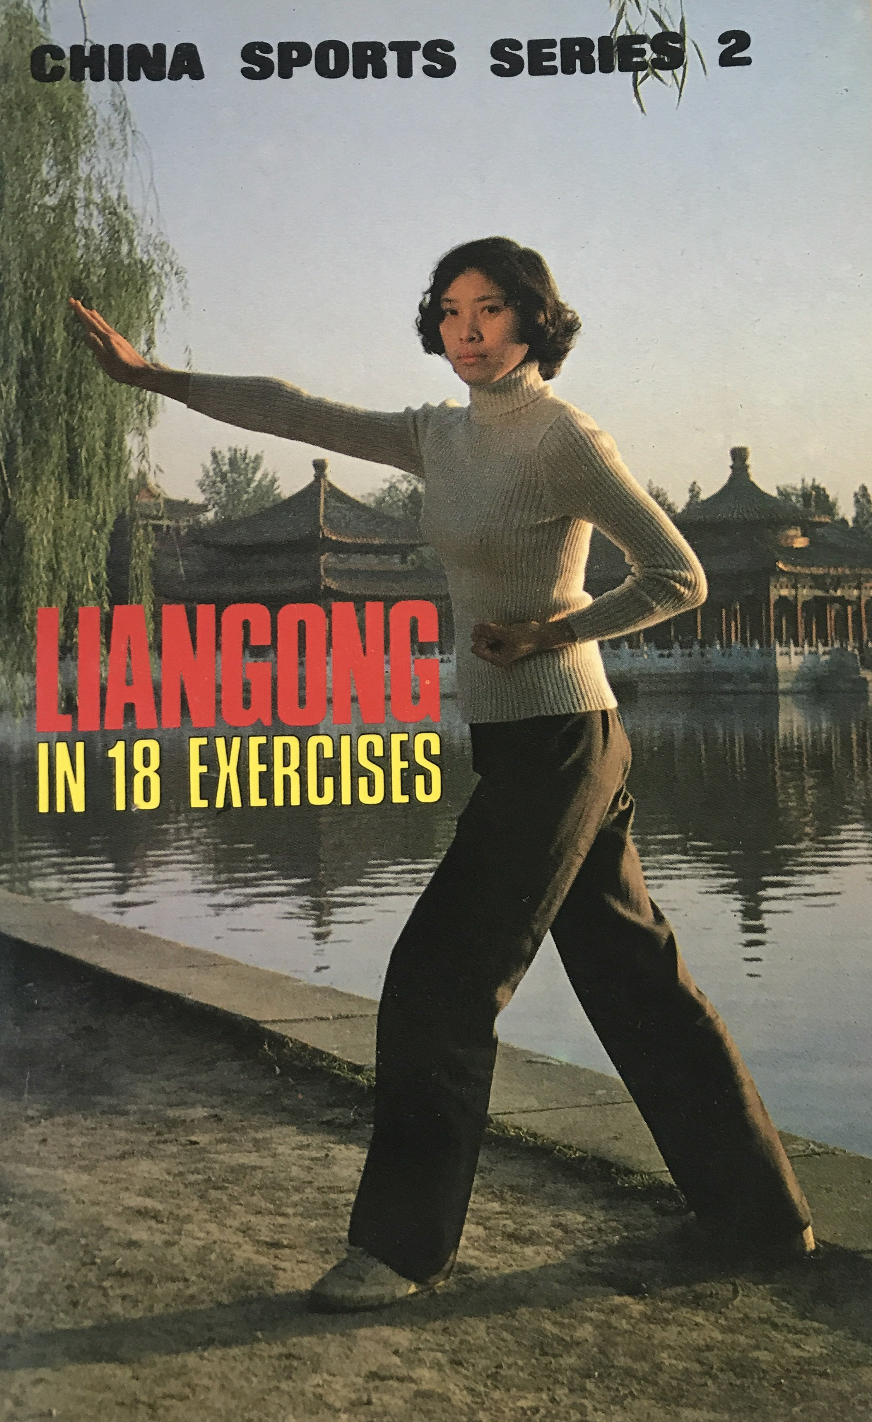 Liangong in 18 Exercises Book (Preowned) - Budovideos Inc